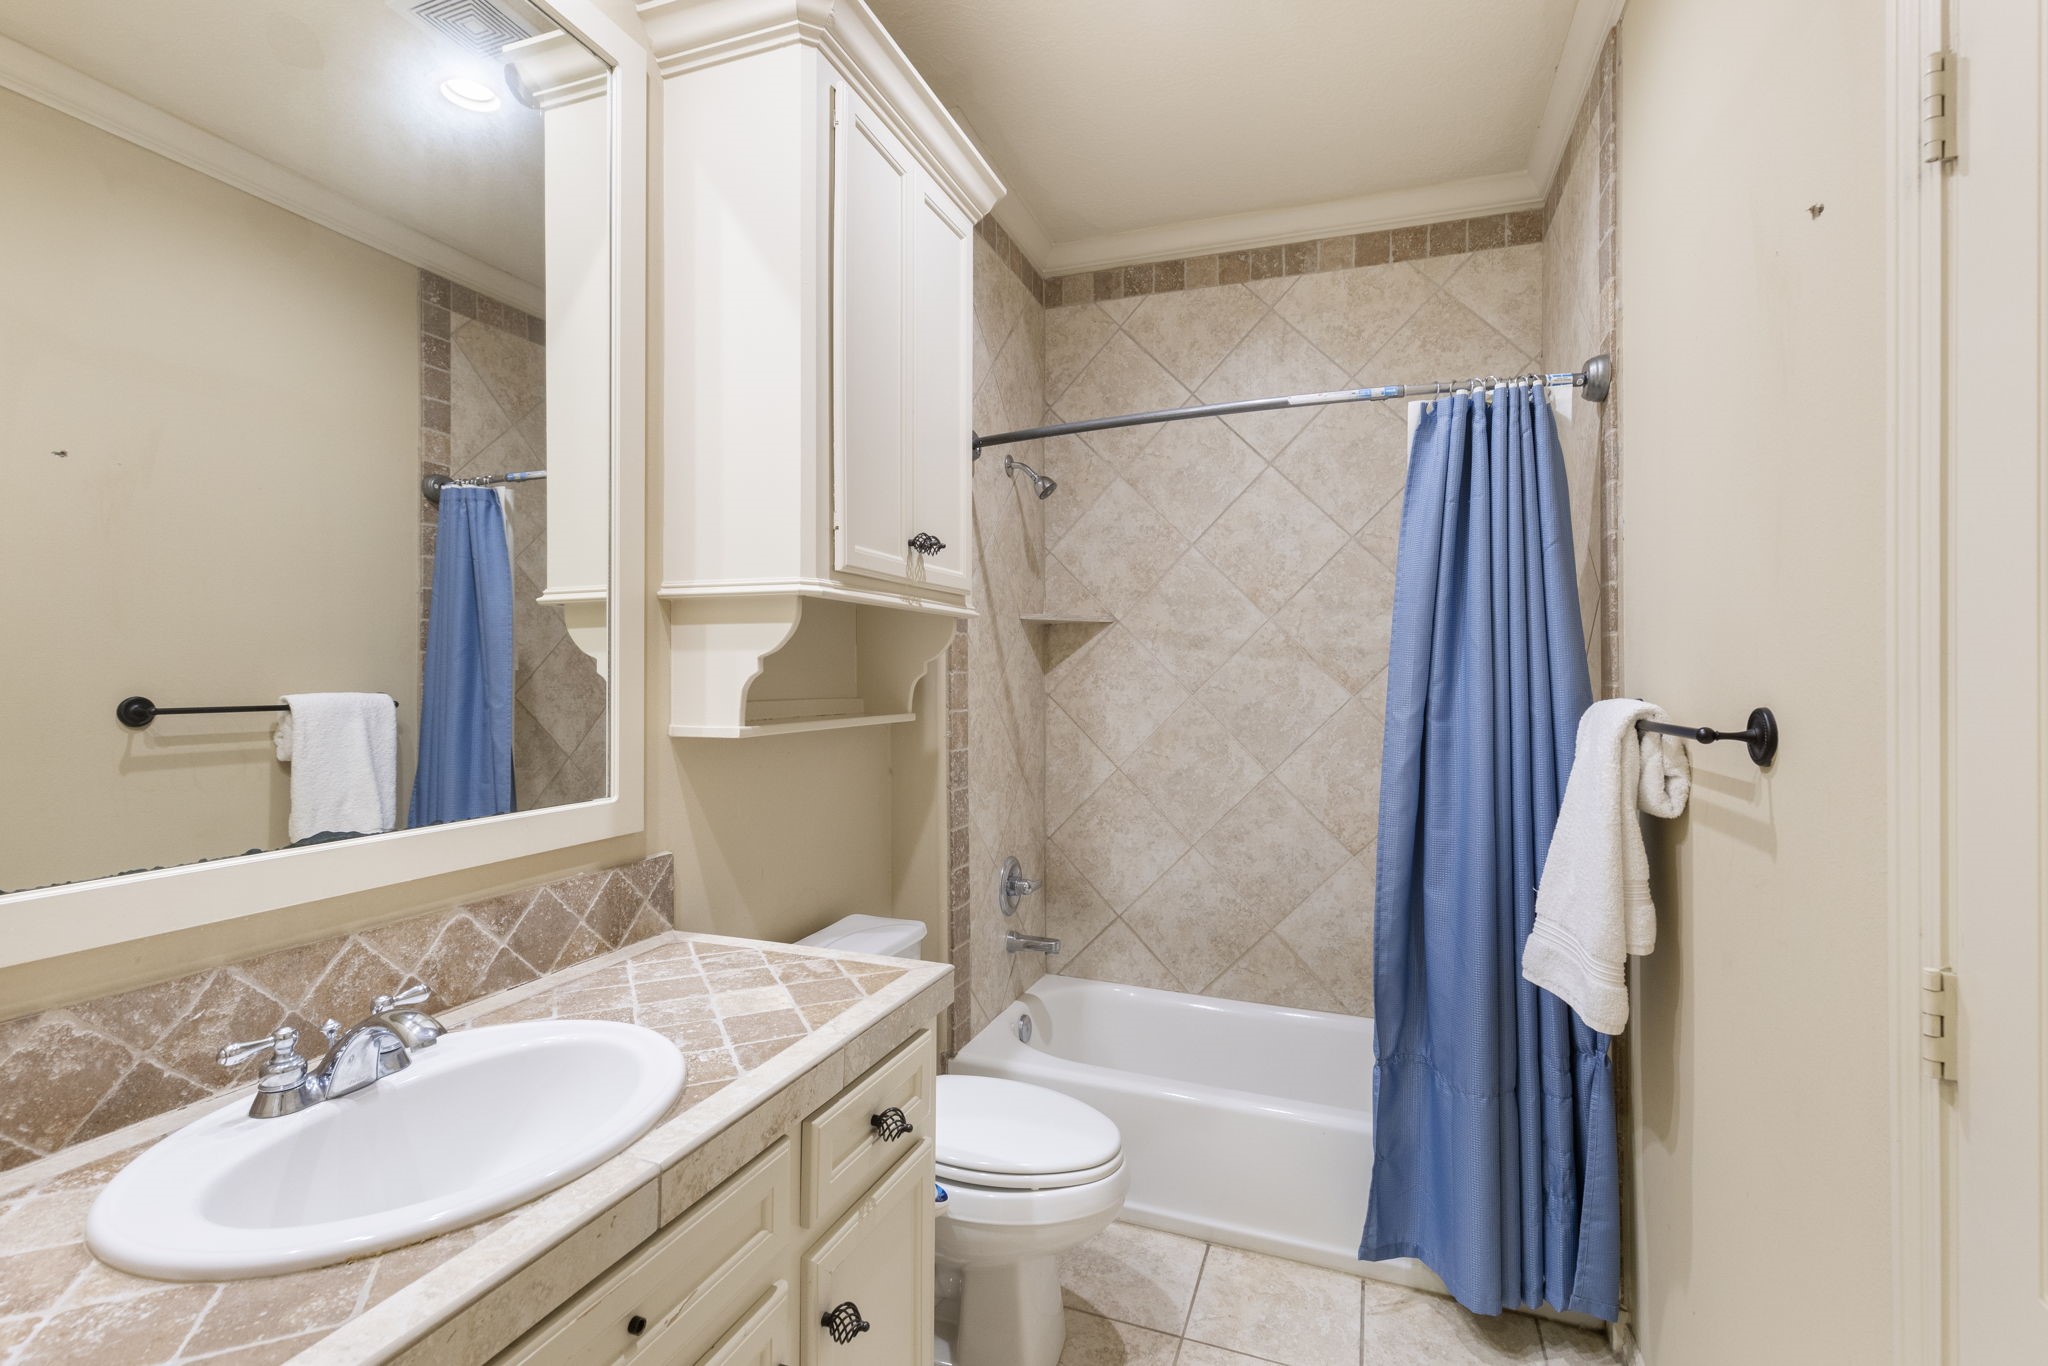 Ensuite bath has a good-sized vanity with rubbed bronze hardware, tub/shower combination with tile surround and LUXE bidet feature.  The closet is efficiently located in the private bathroom.